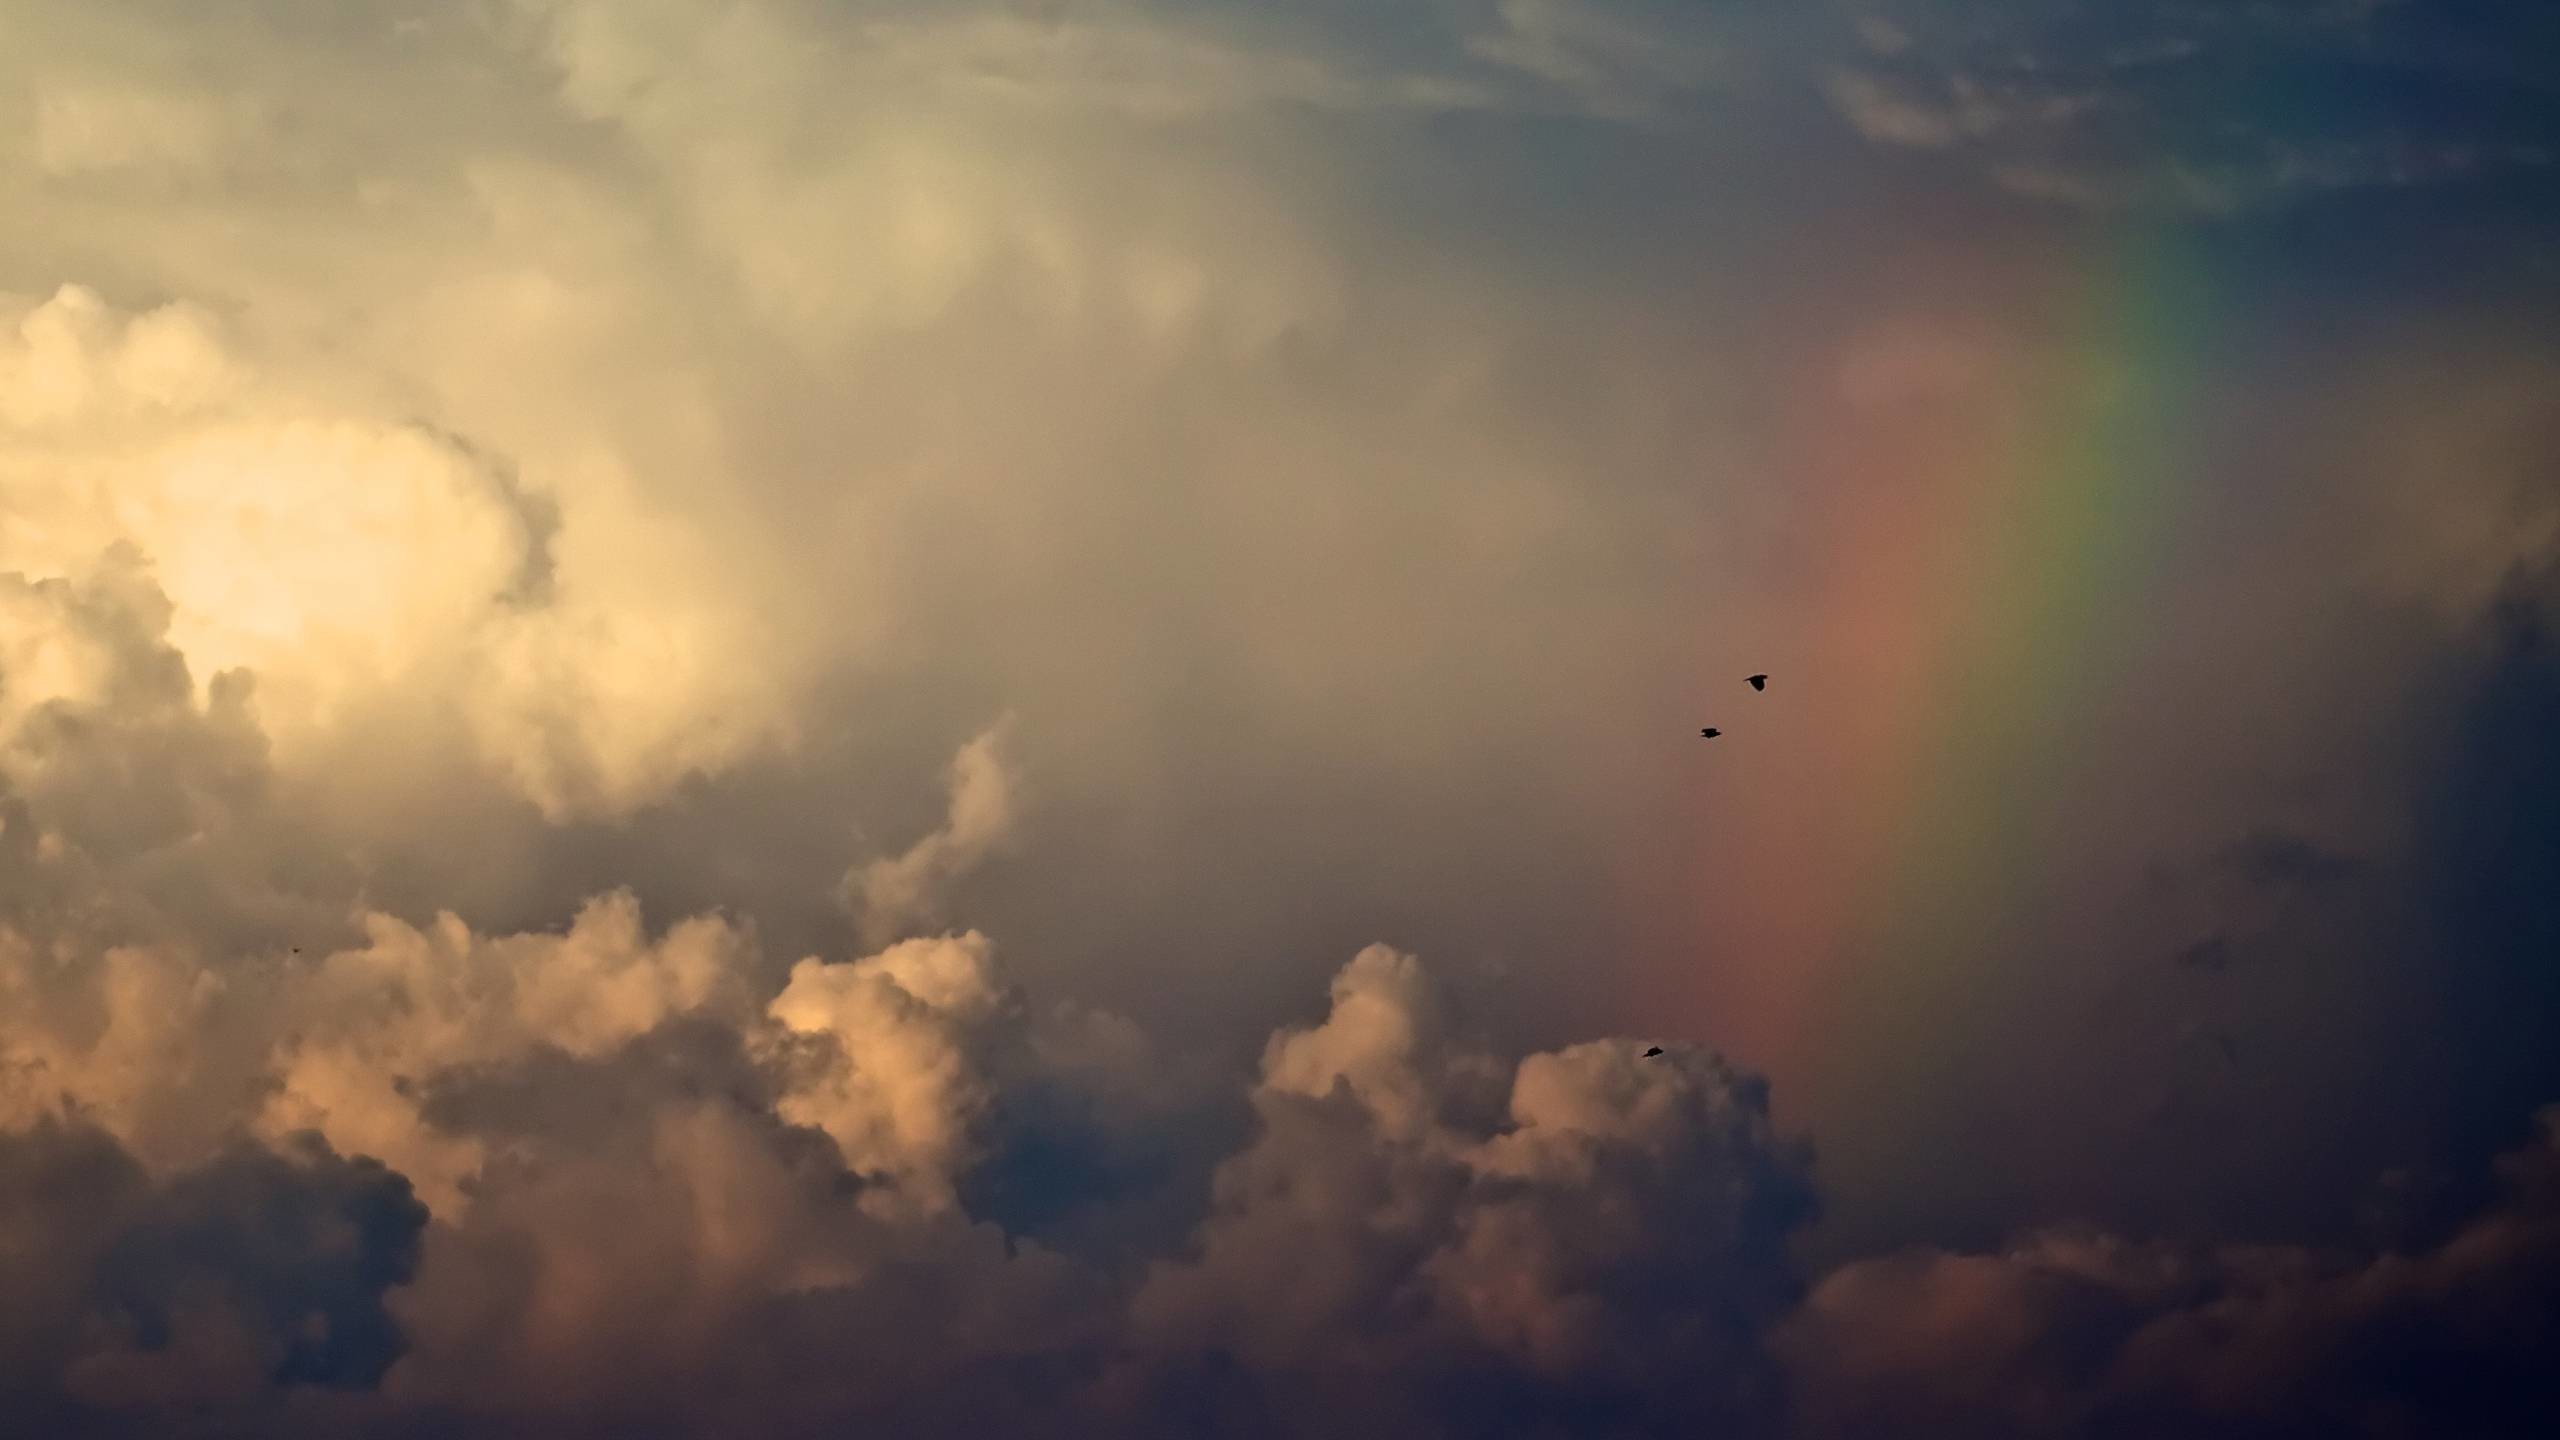 2560x1440 Storm-Clouds-And-Rainbow-iMac-Wallpaper